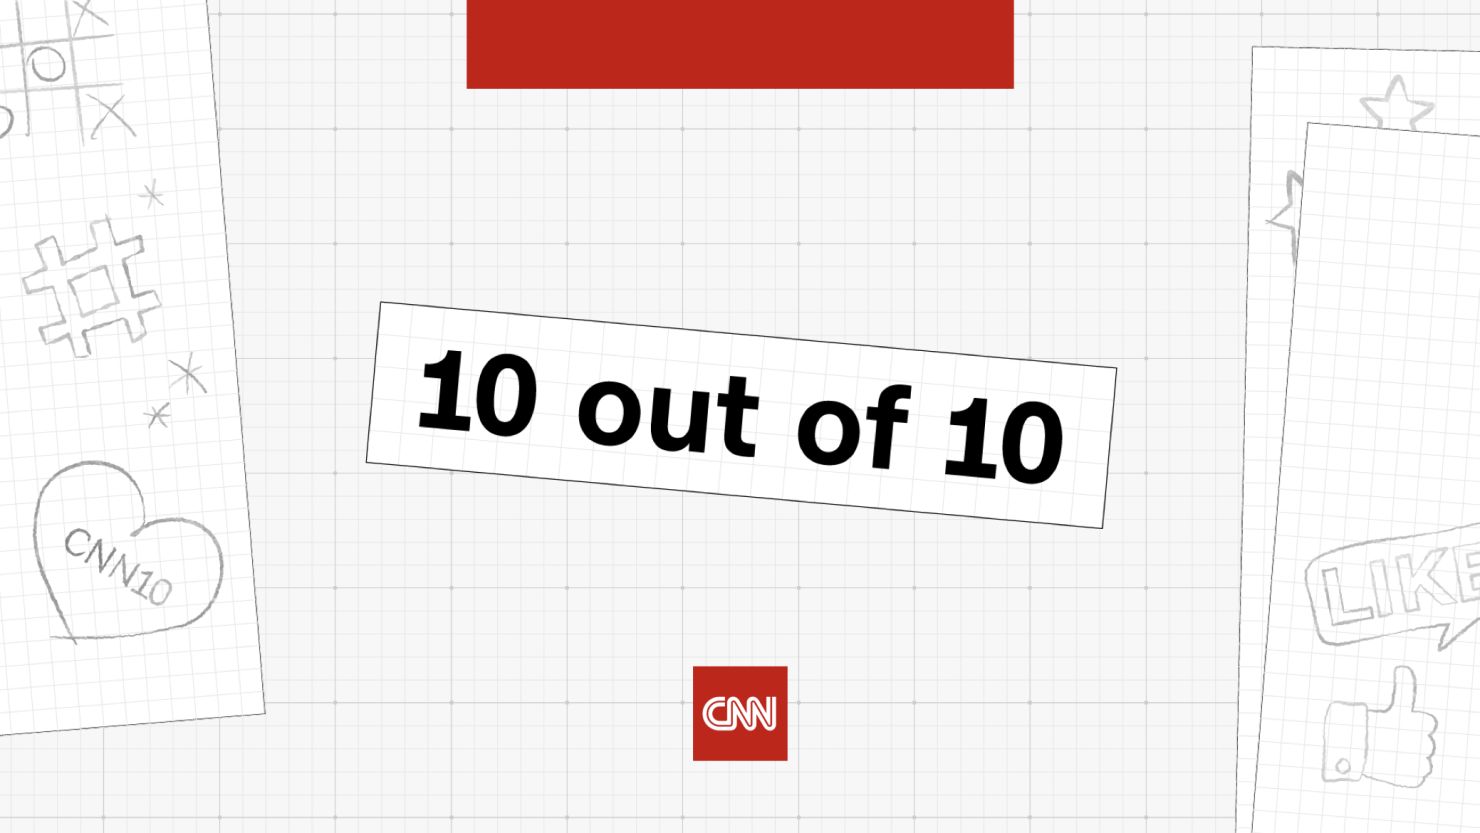 CNN 10 out of 10